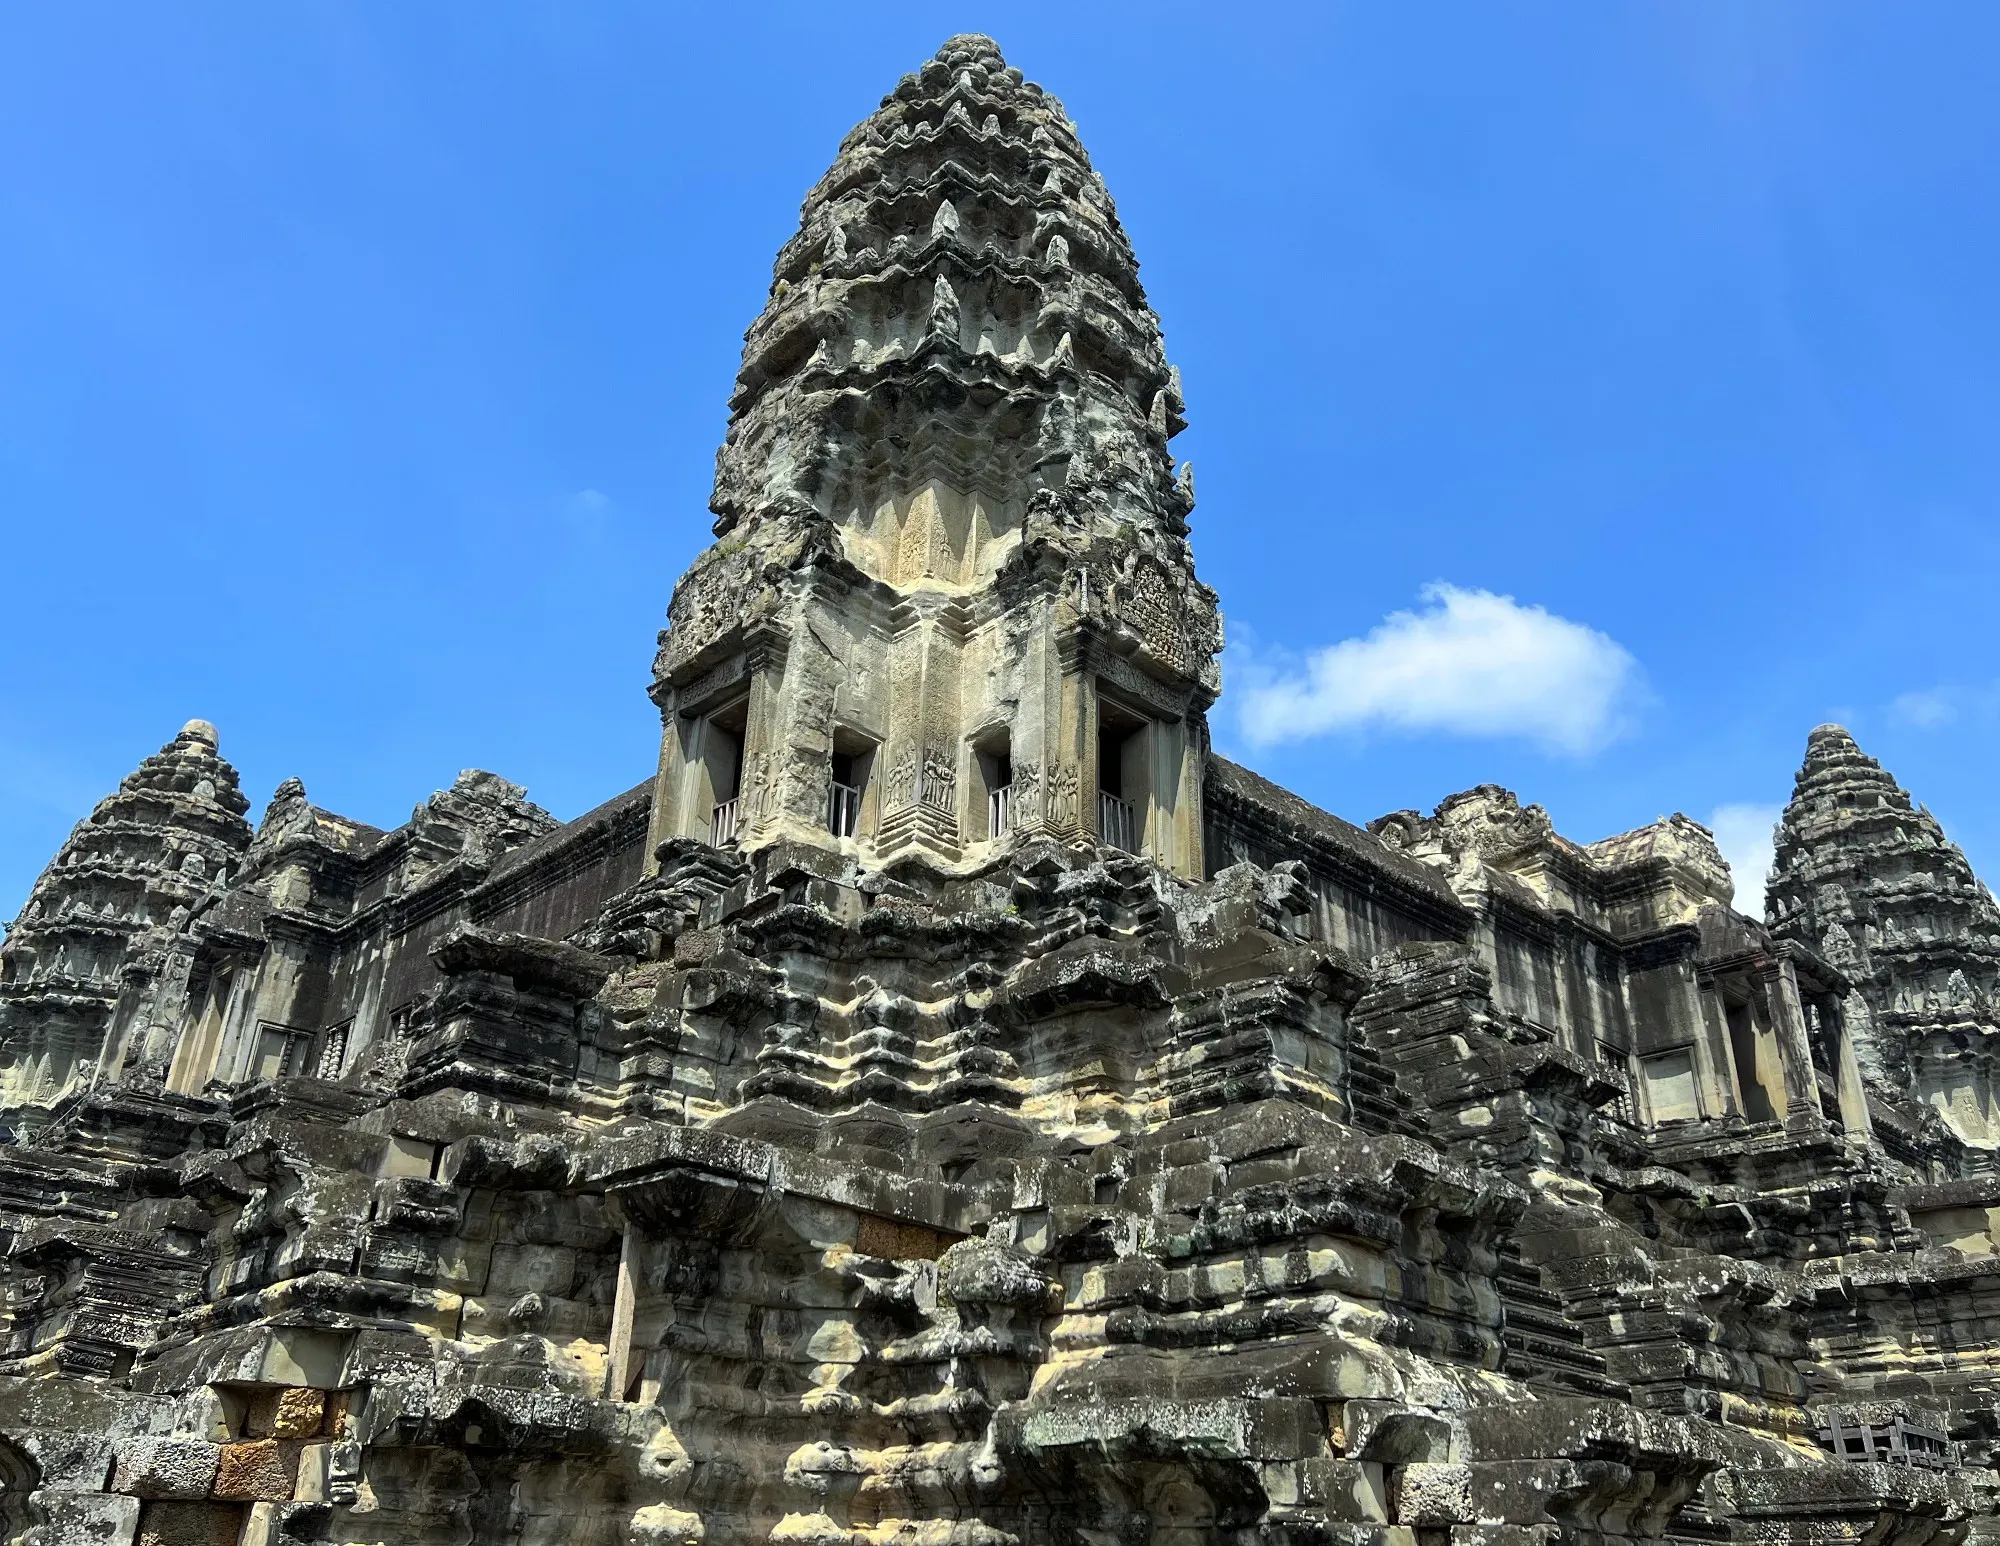 Photo angled up of one of the Angkor Wat towers